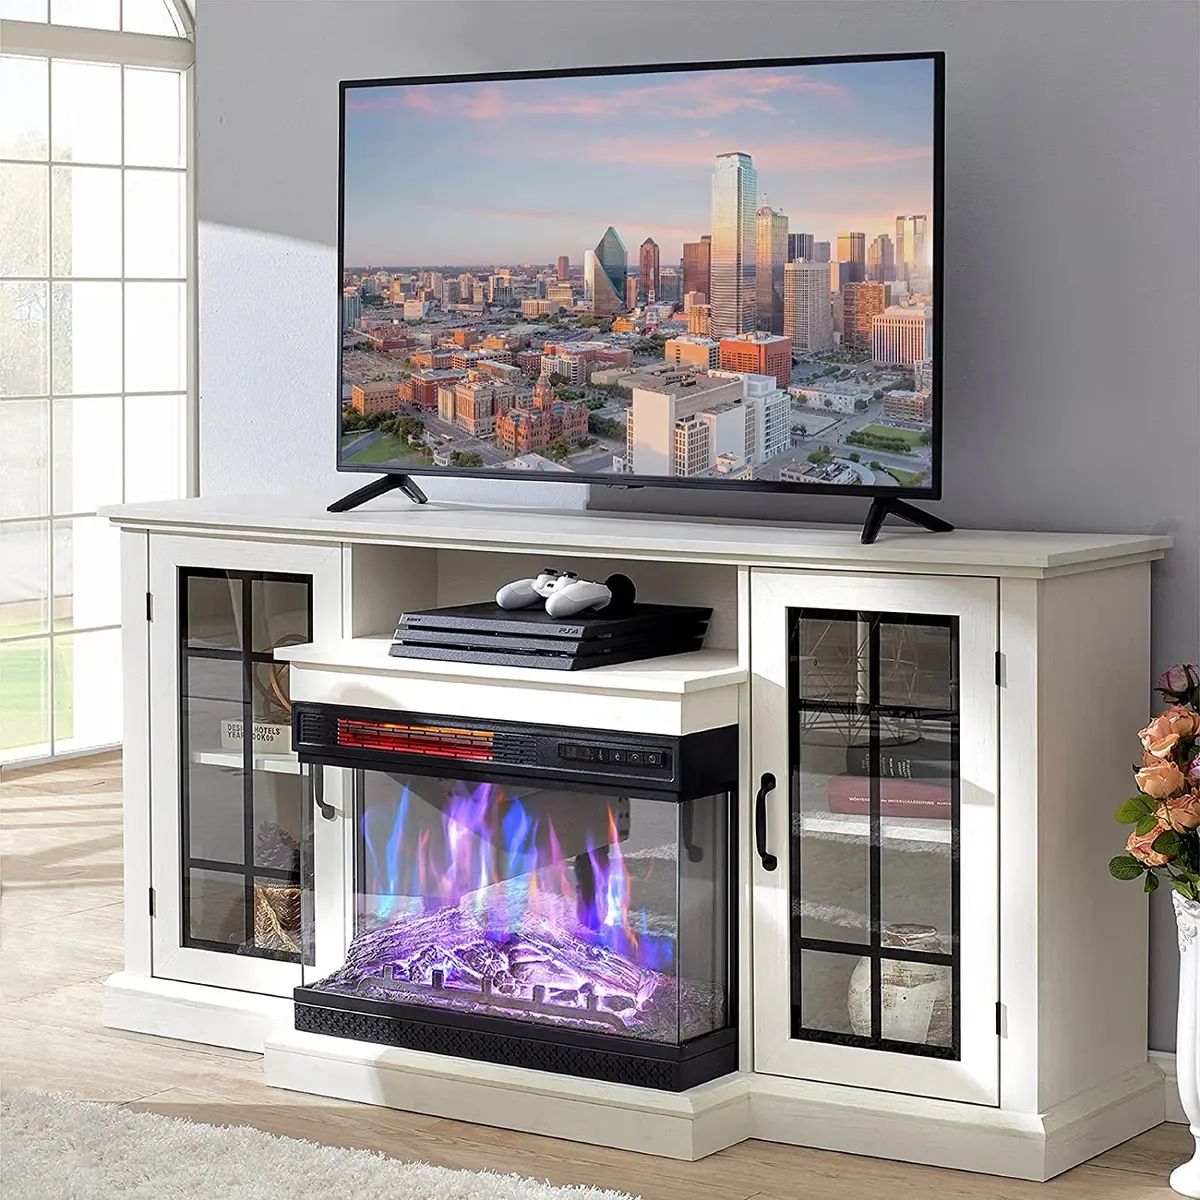 3 Sided Glass Fireplace Tv Stand For Tvs Up To 65", Glass Door, Distressed  White | Ebay With Regard To Modern Fireplace Tv Stands (View 13 of 15)